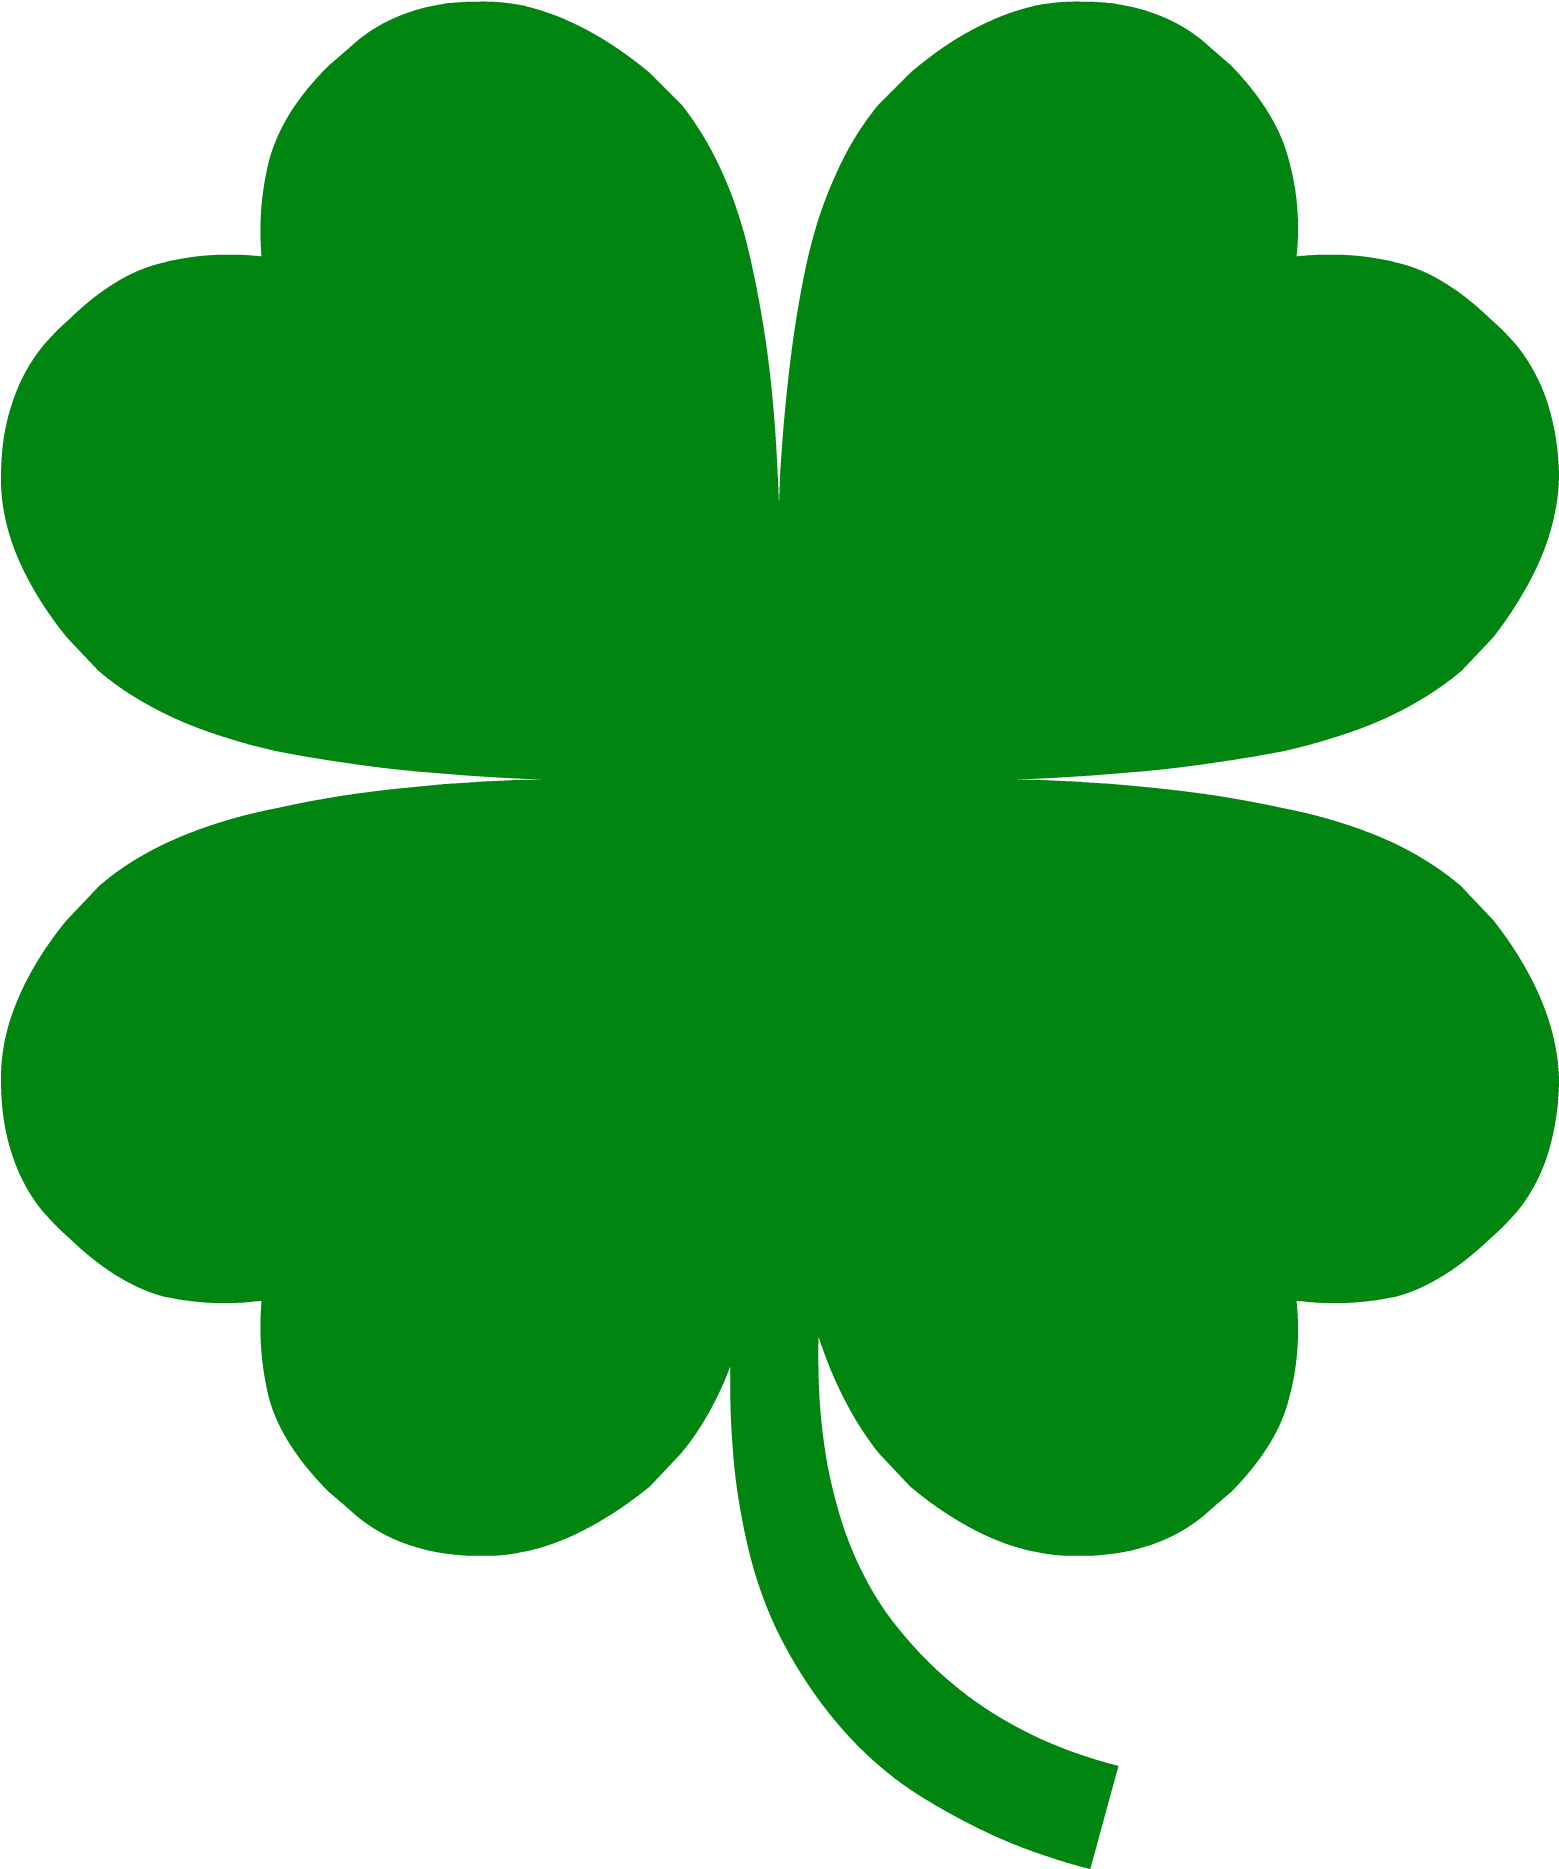 It S Here Pictures Of A Four Leaf Clover Image - 4 Leaf Clover Template (2000x2000)